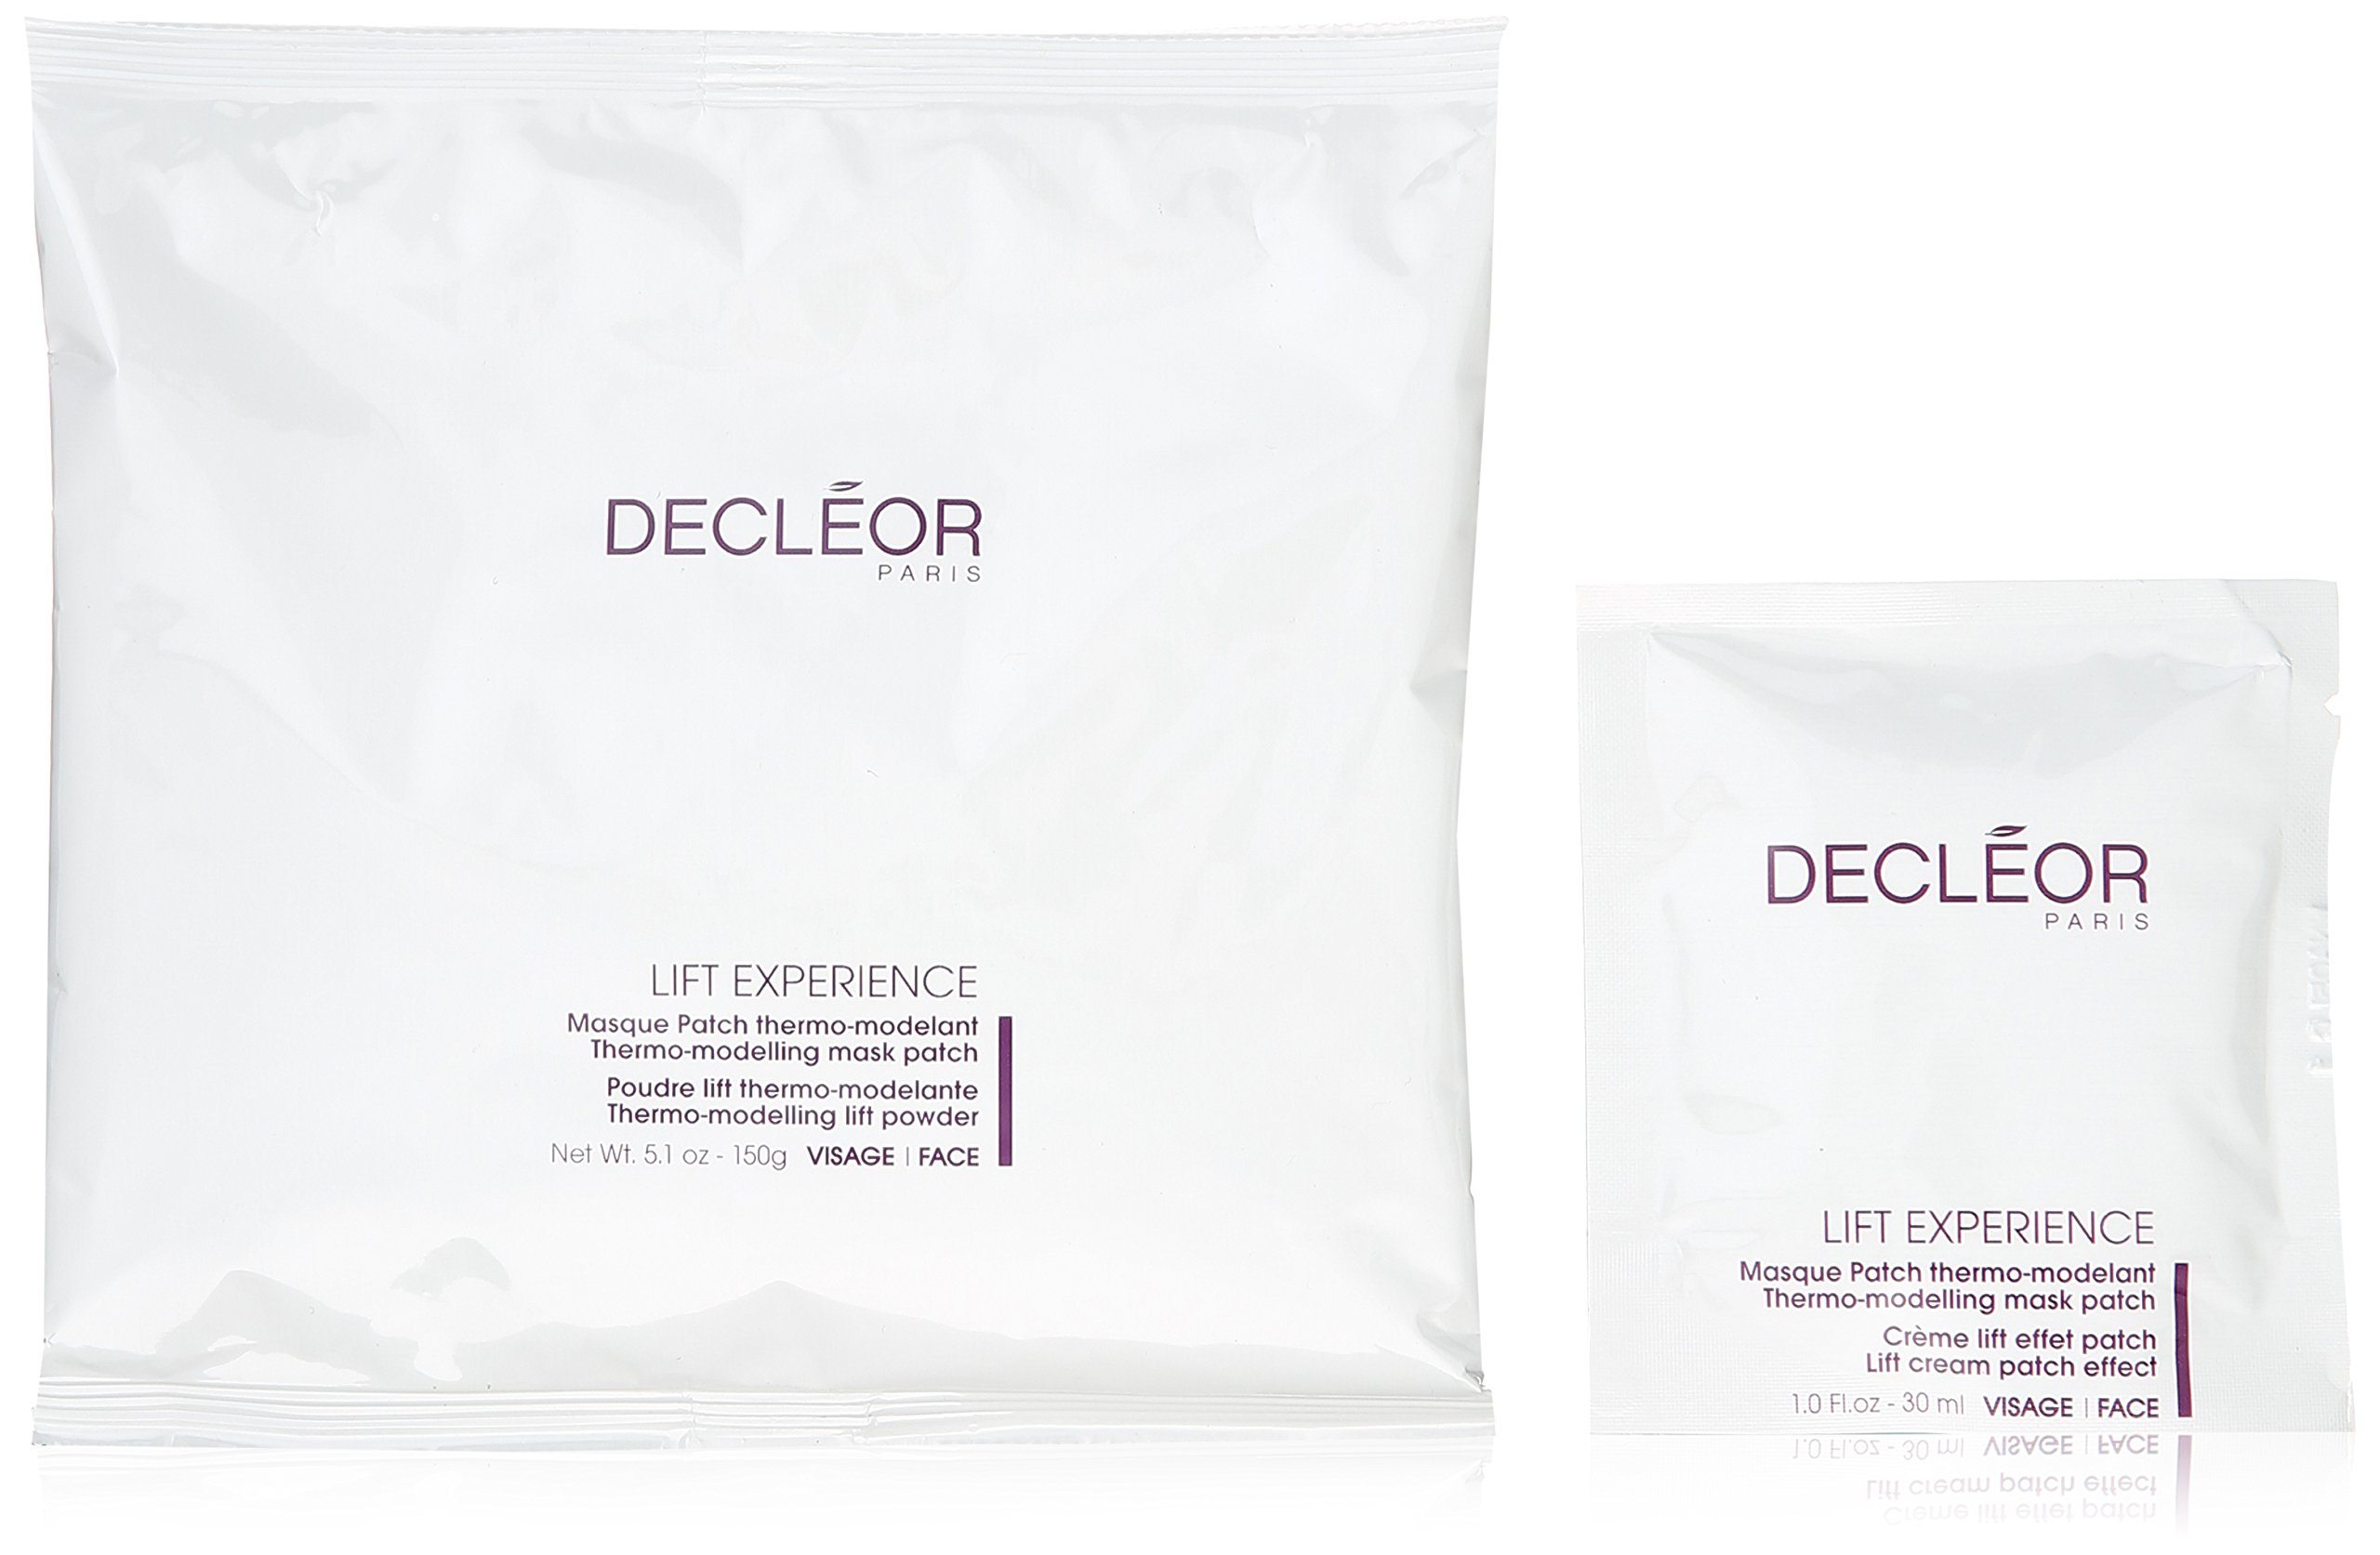 DECLEOR Experience Professional Mask, 5 Stück